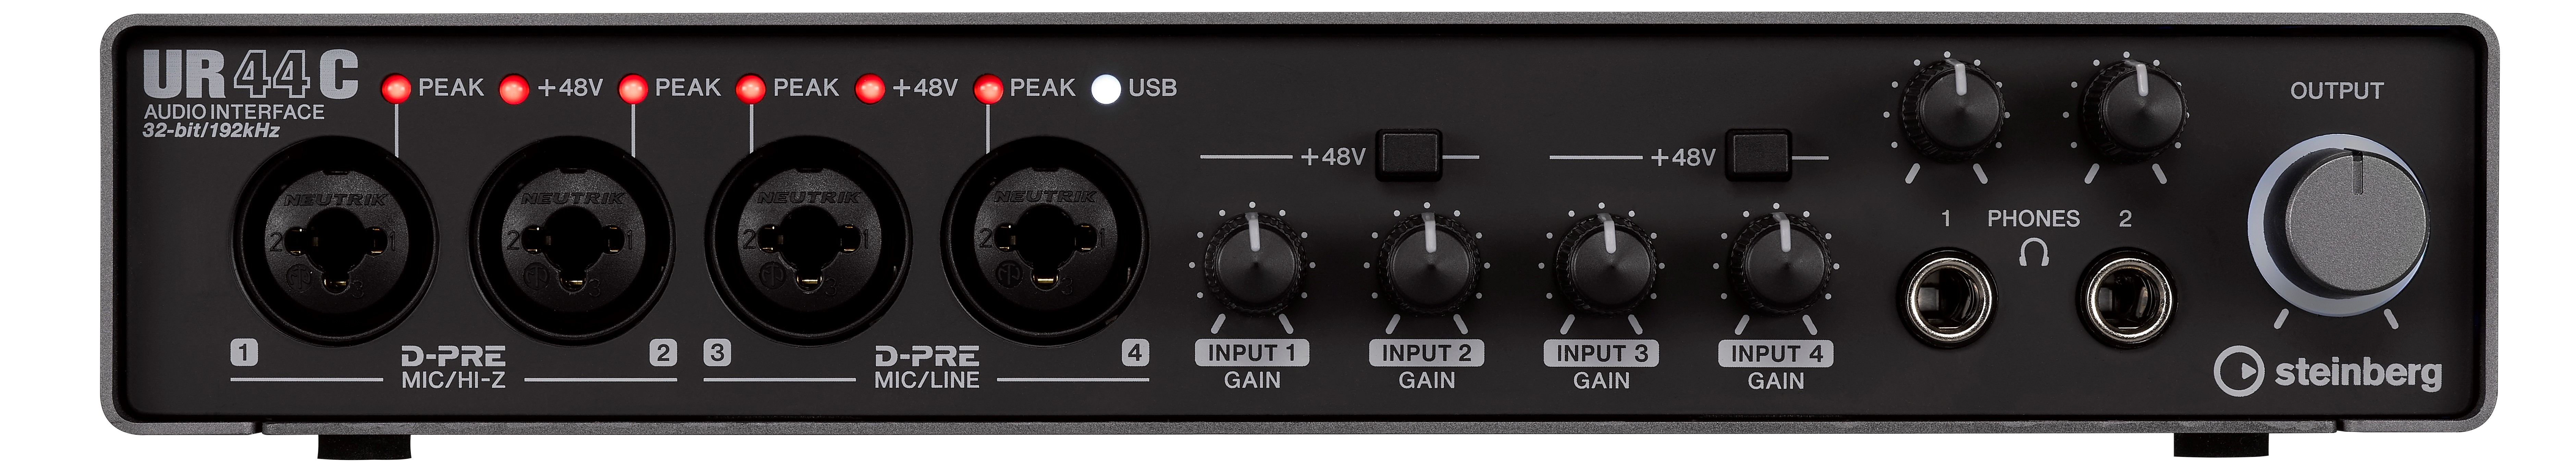 best audio interface 2018 for mac